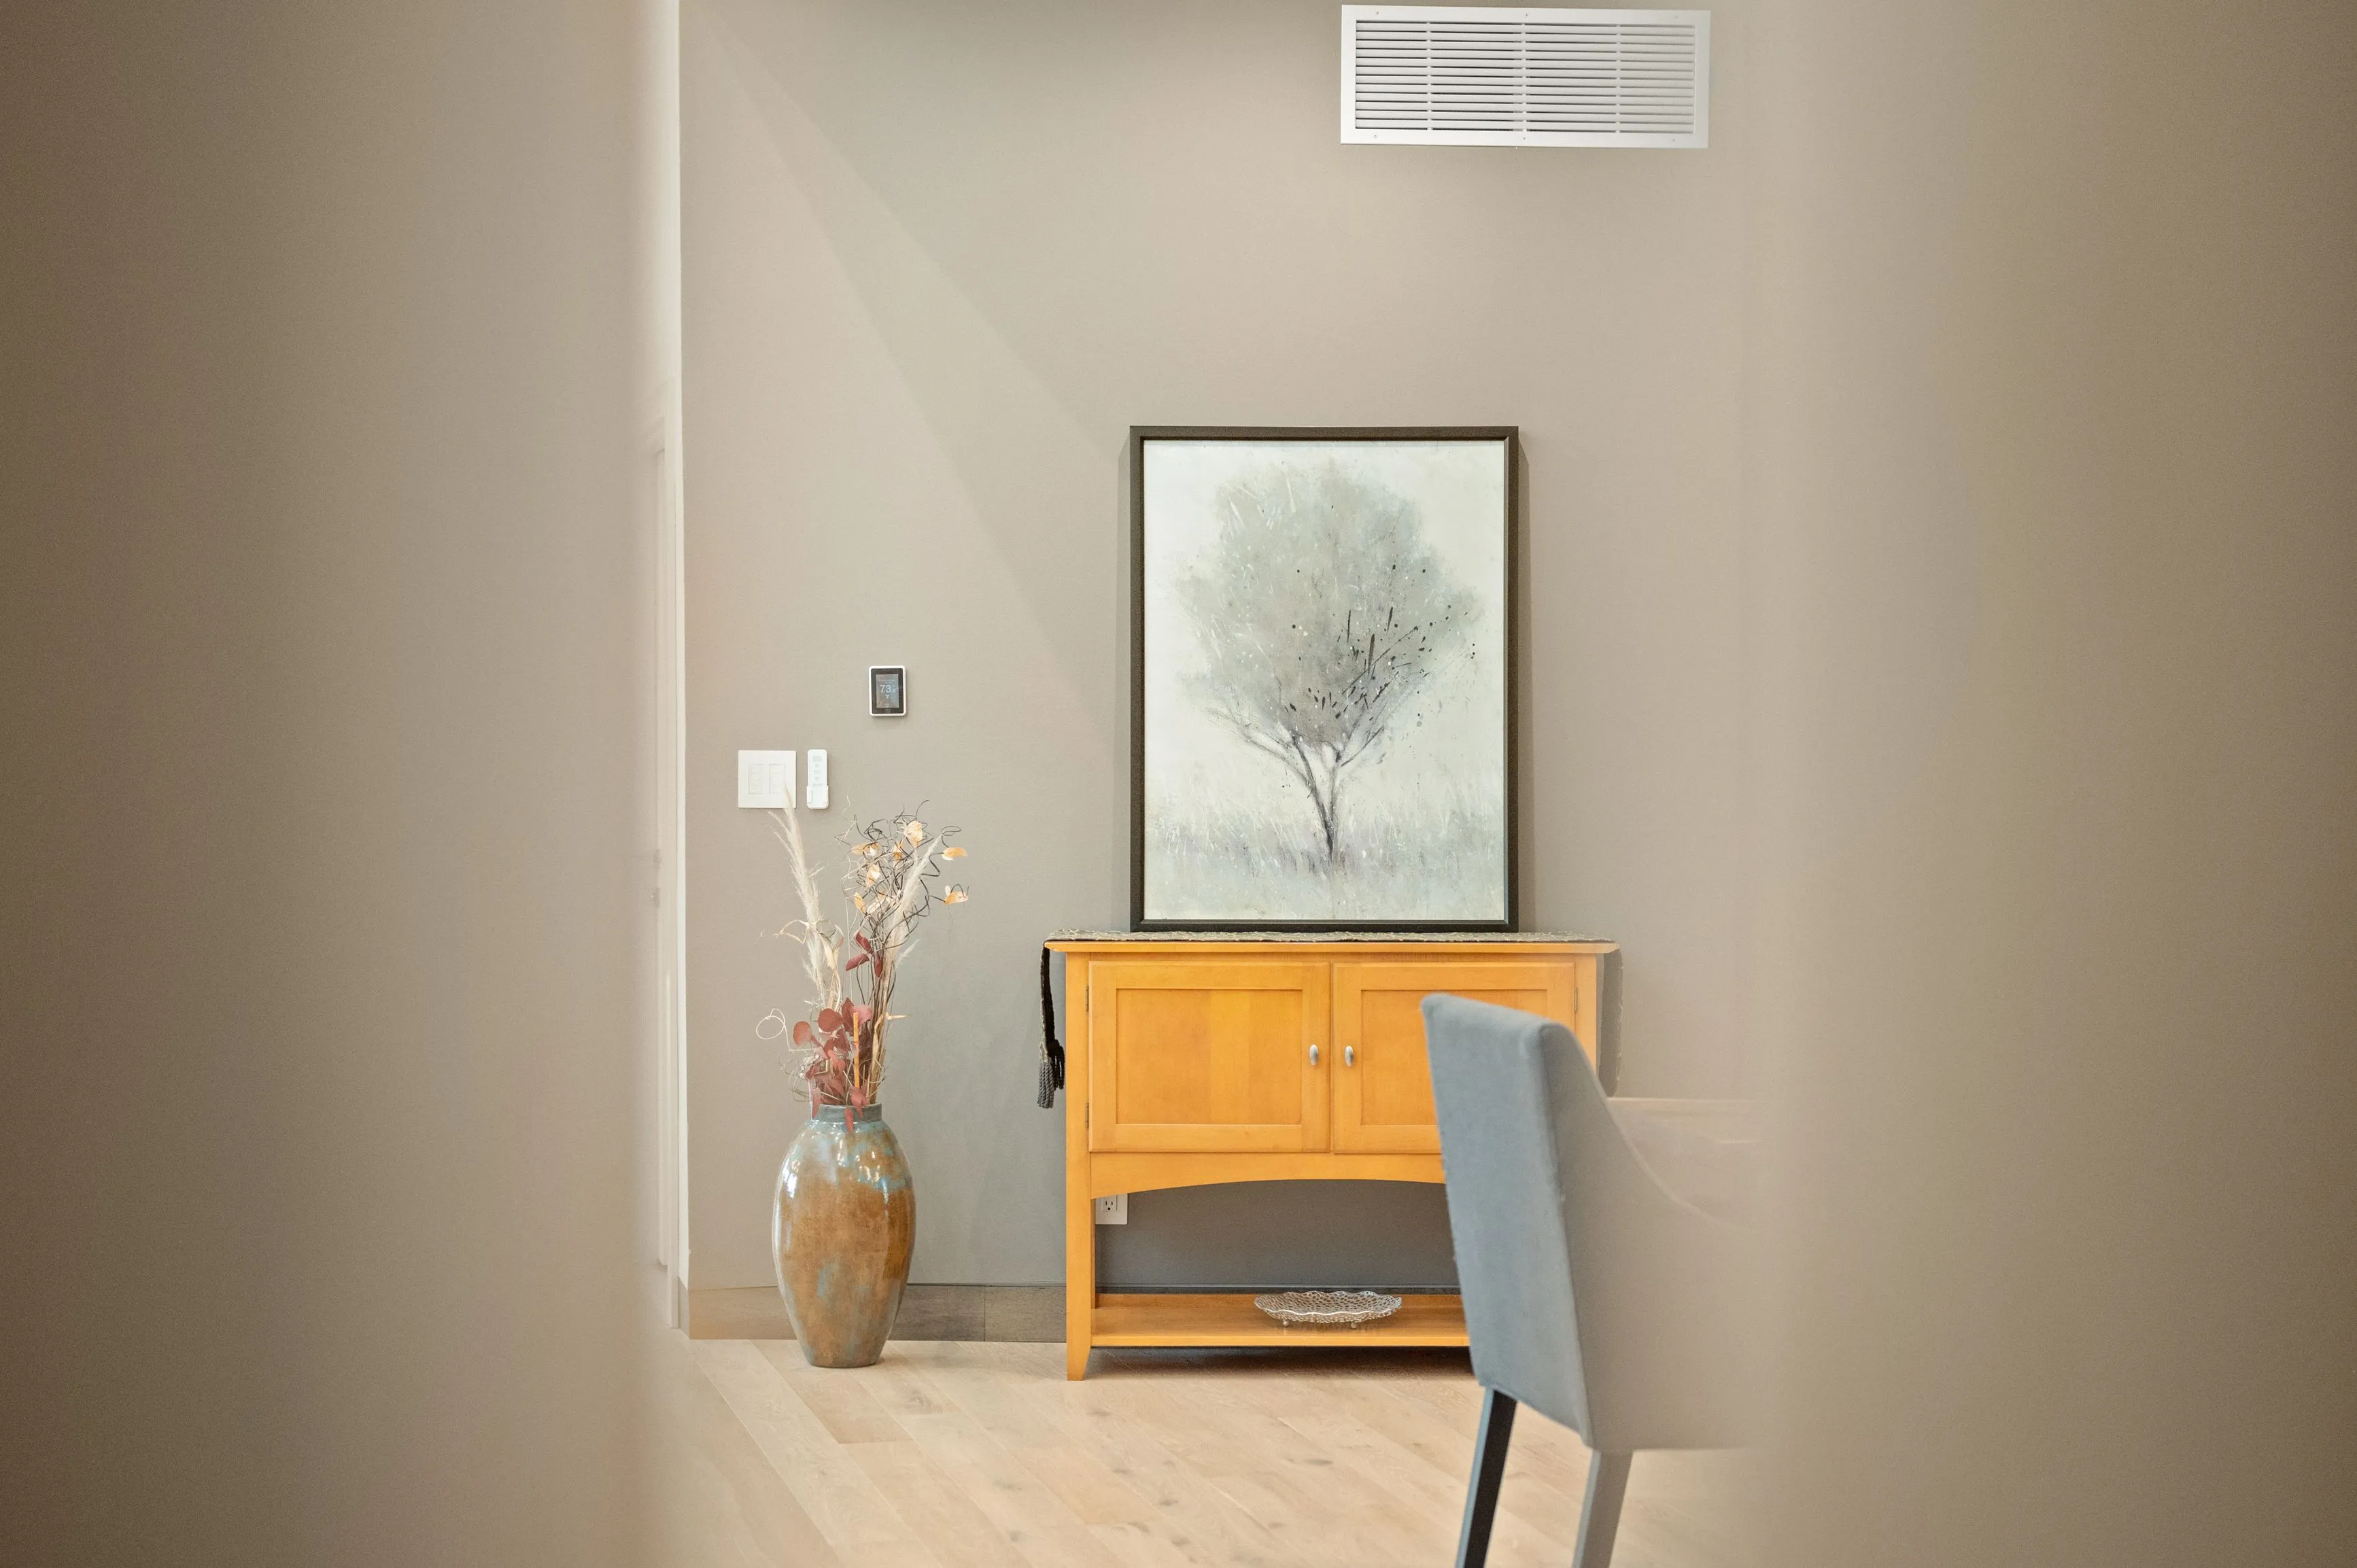 Modern interior design featuring a wooden console table with decorative vase and painting of a tree on the wall, partially viewed through an open door.